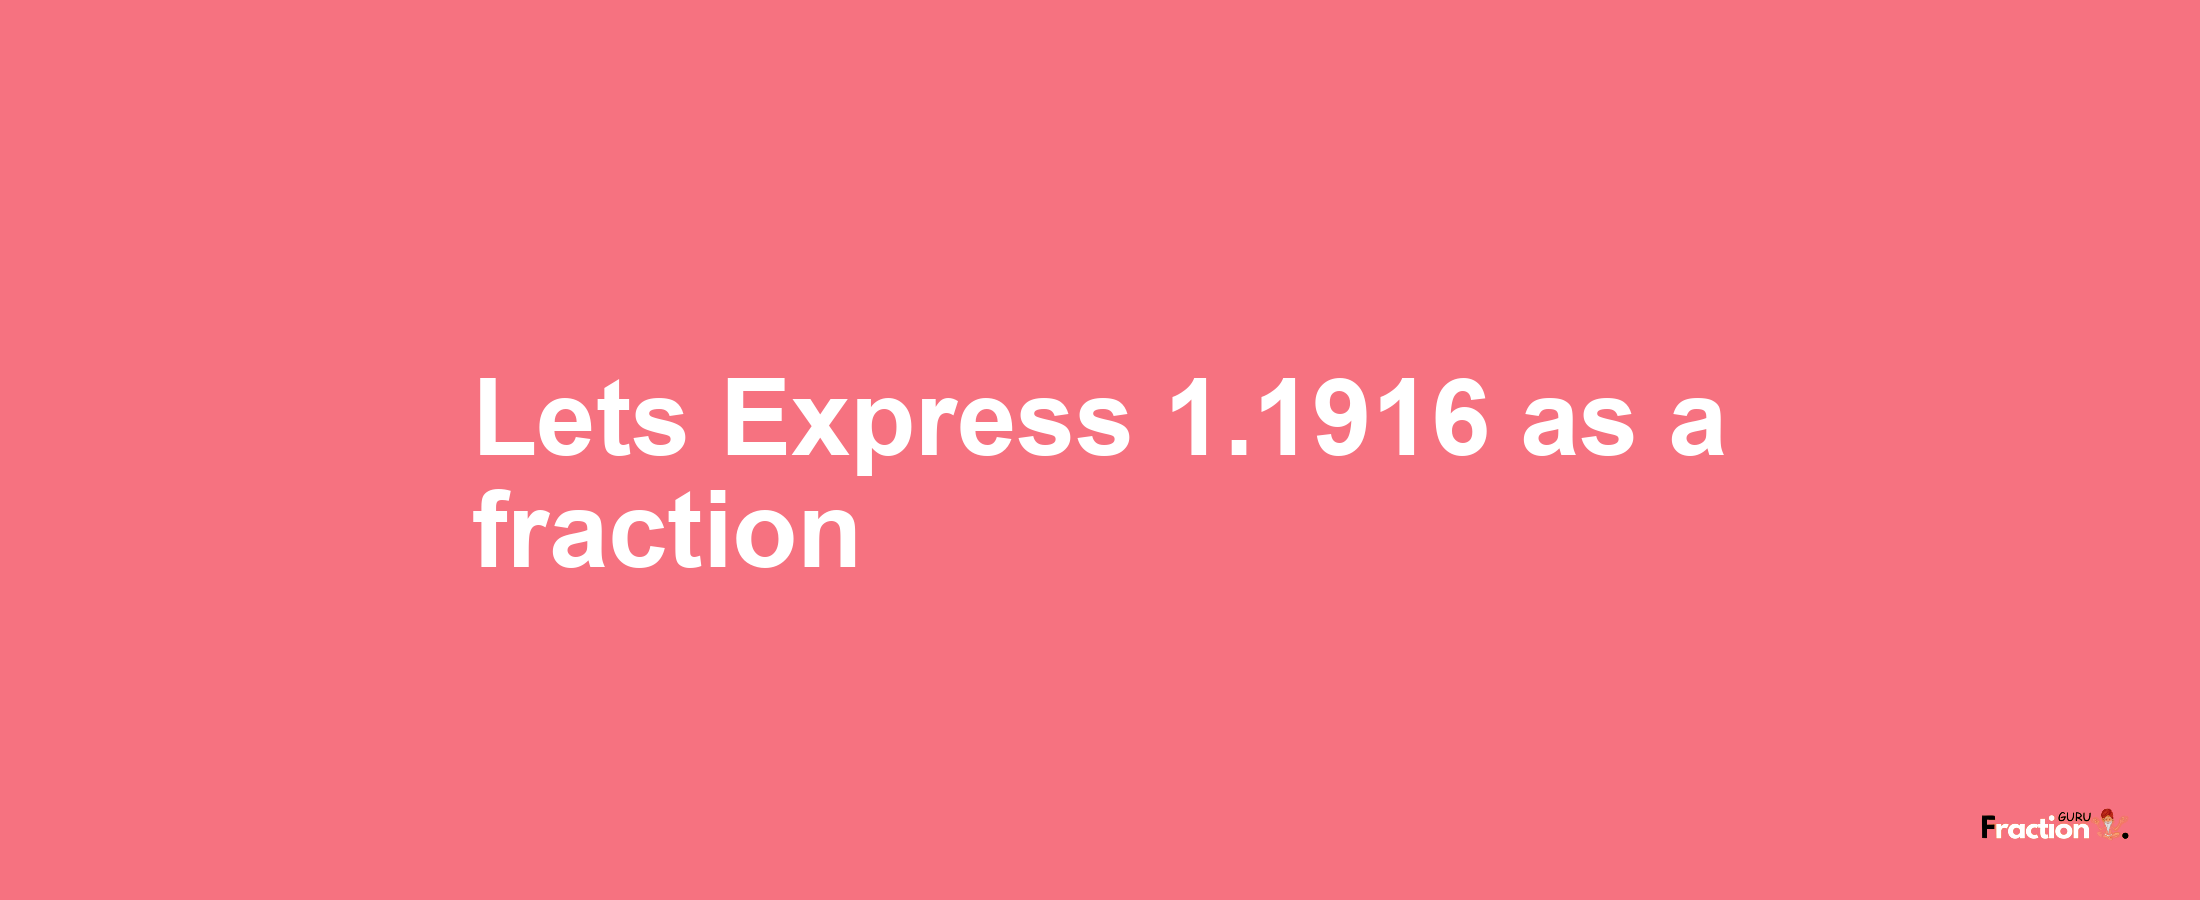 Lets Express 1.1916 as afraction